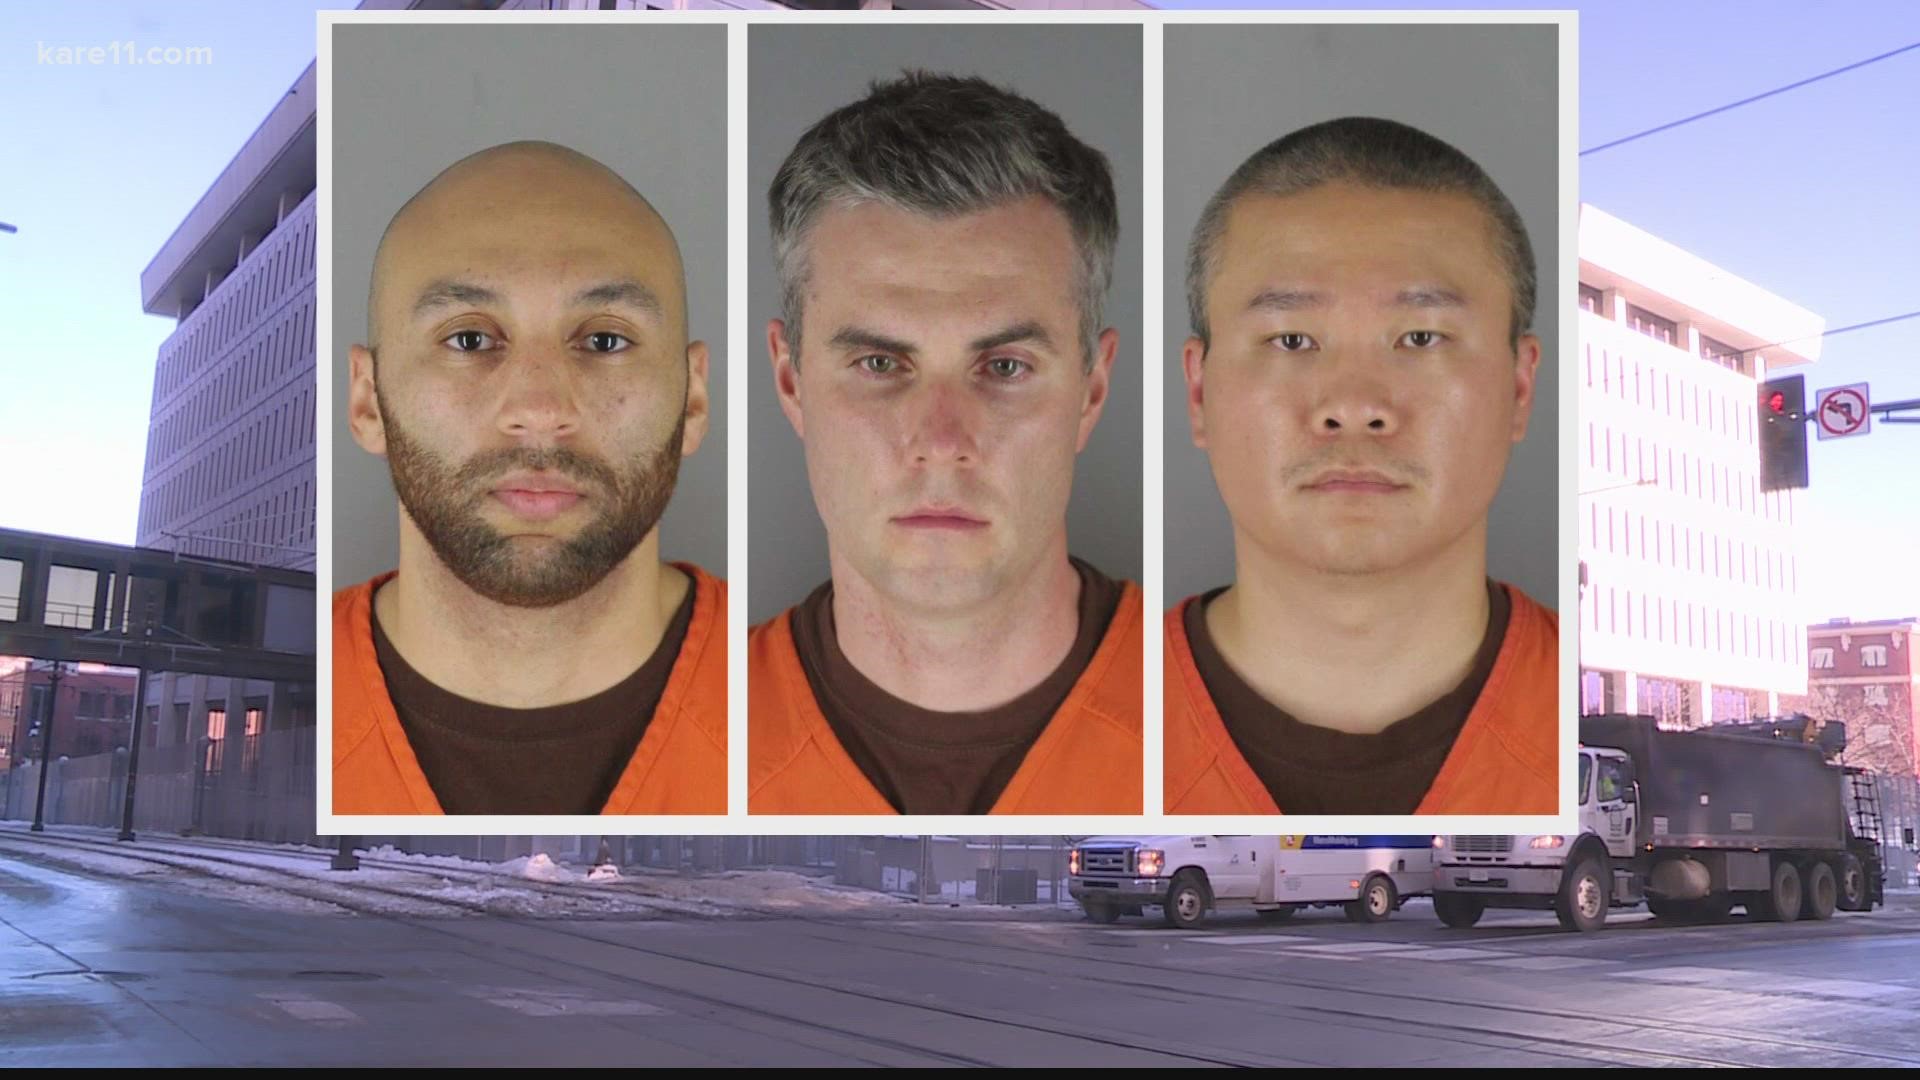 J Alexander Kueng, Thomas Lane and Tou Thao are all charged with violating the rights of George Floyd on the day he was killed in May 2020.